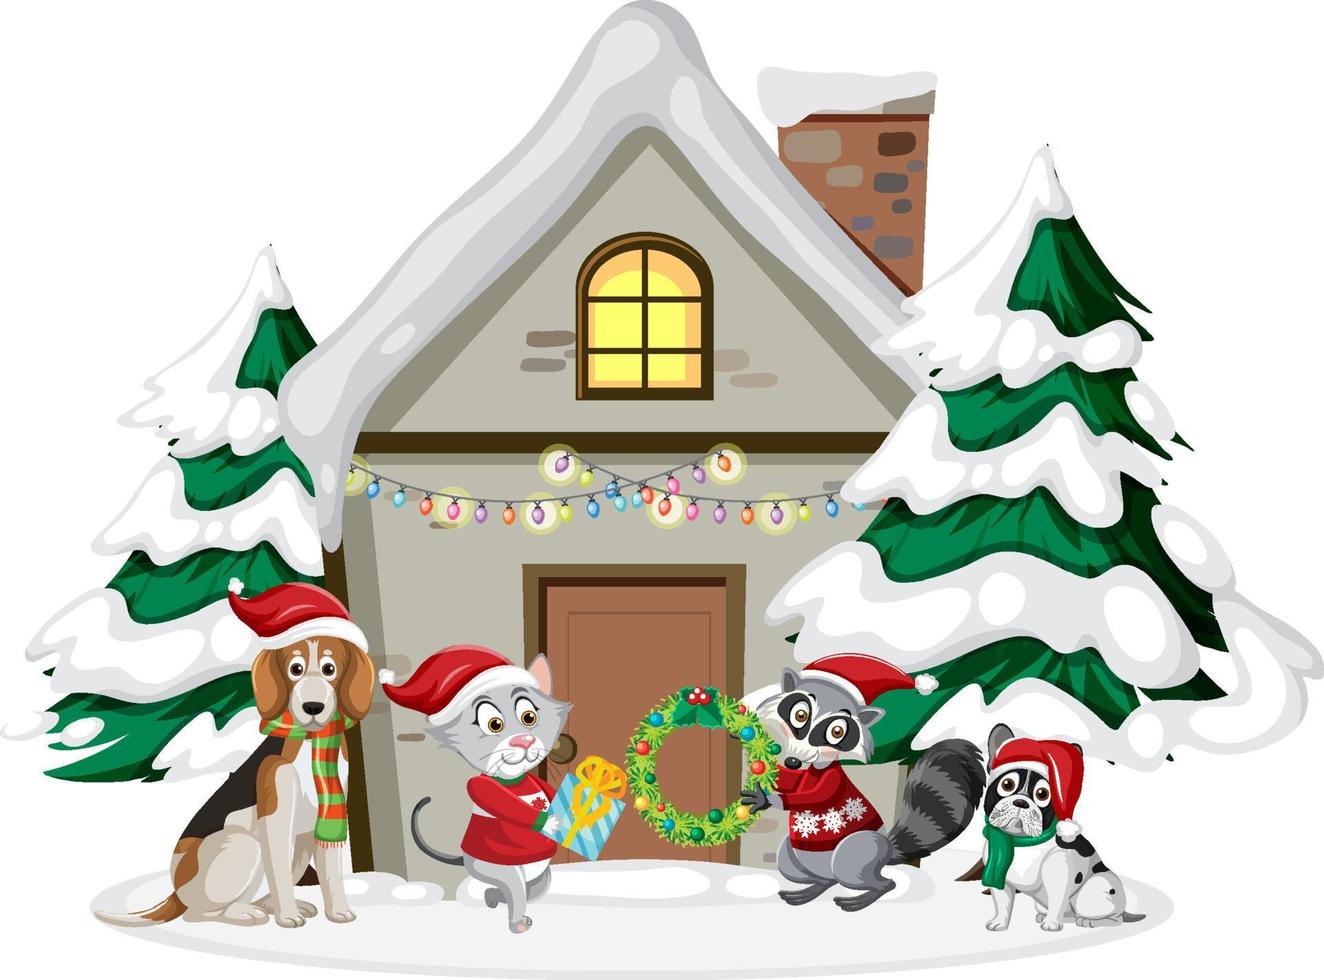 Animals standing in front of winter house in Christmas theme vector